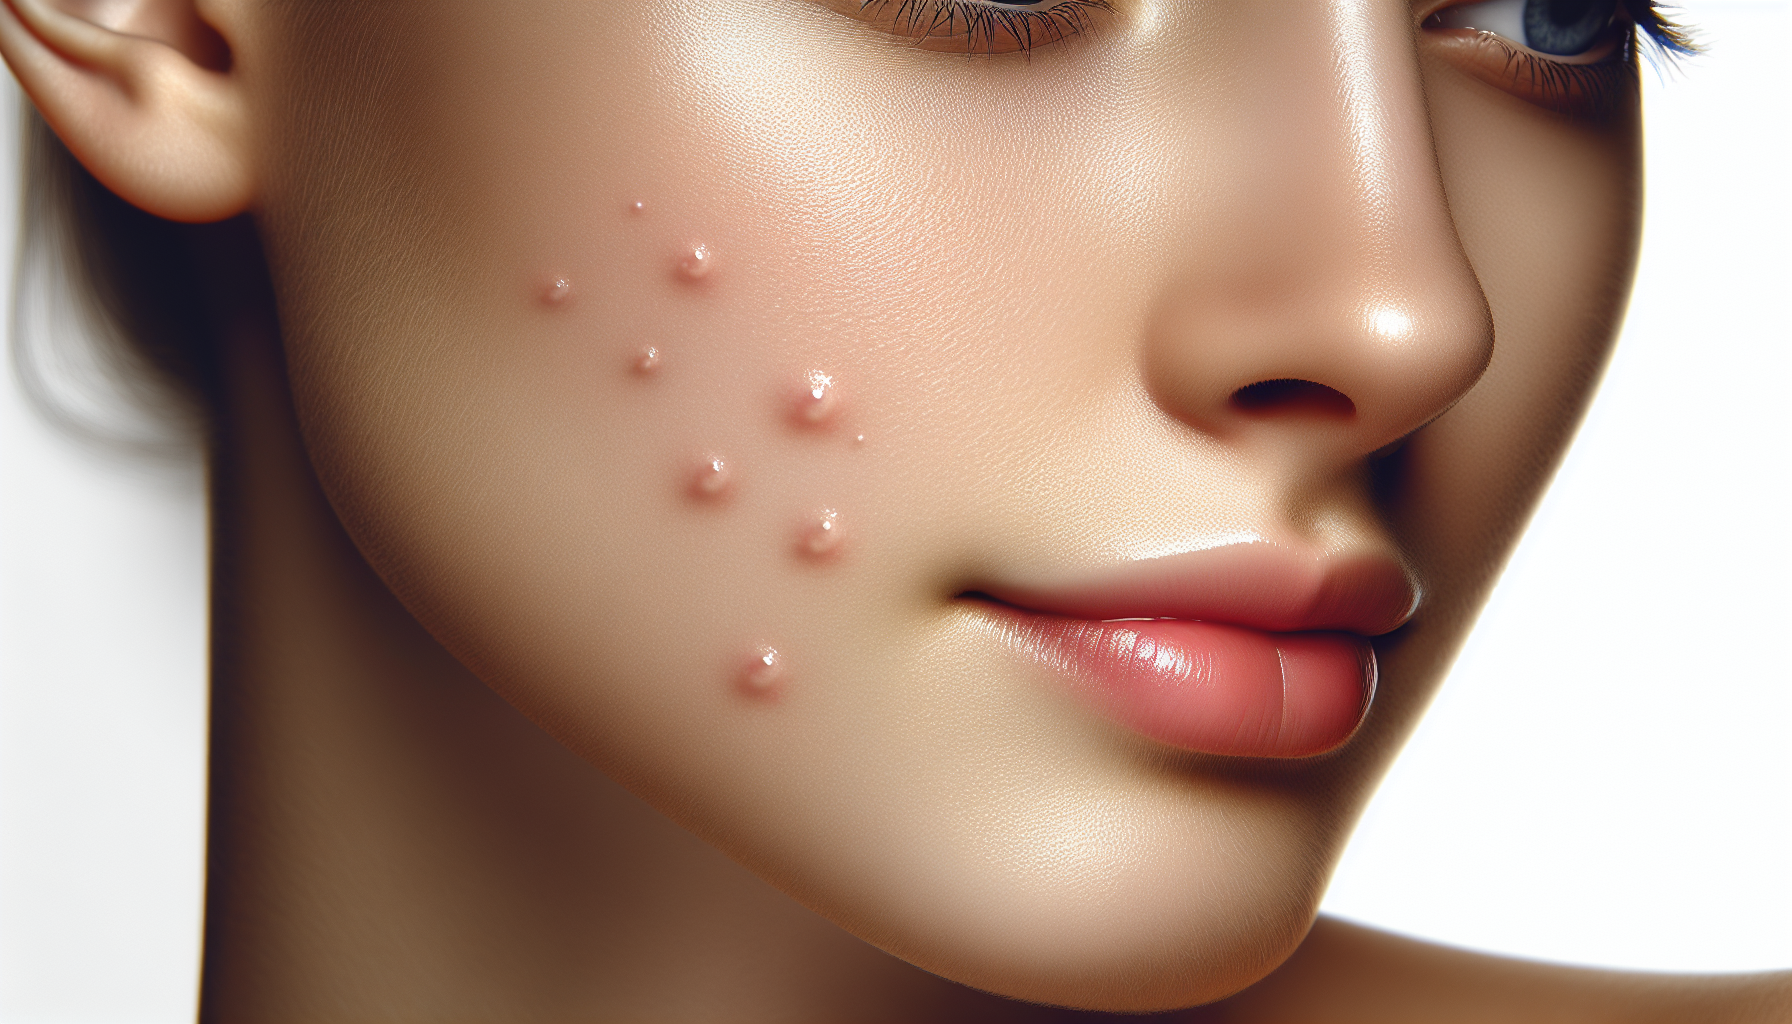 Does Acne Ever Completely Go Away?